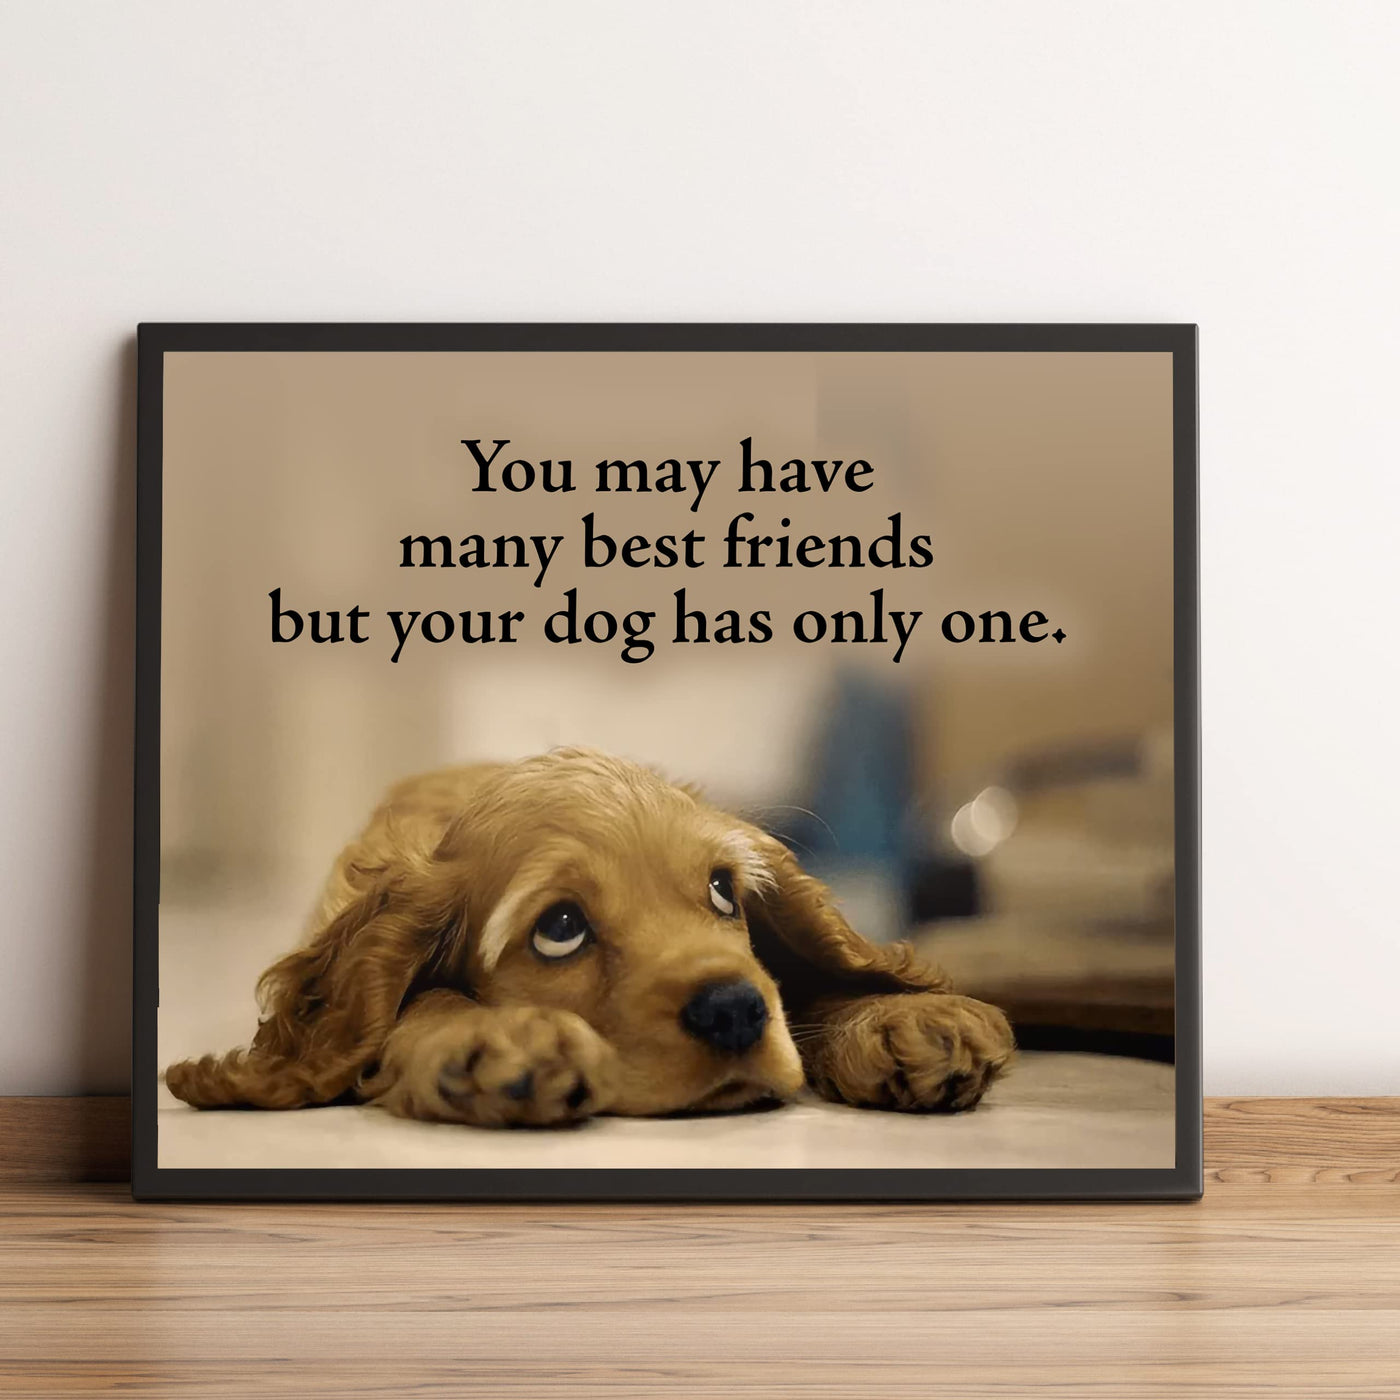 Your Dog Only Has One Best Friend Inspirational Pet Wall Art Sign -10 x 8" Cute Typographic Puppy Picture Print -Ready to Frame. Home-Vet's Office Decor. Great Gift & Reminder for All Dog Lovers!